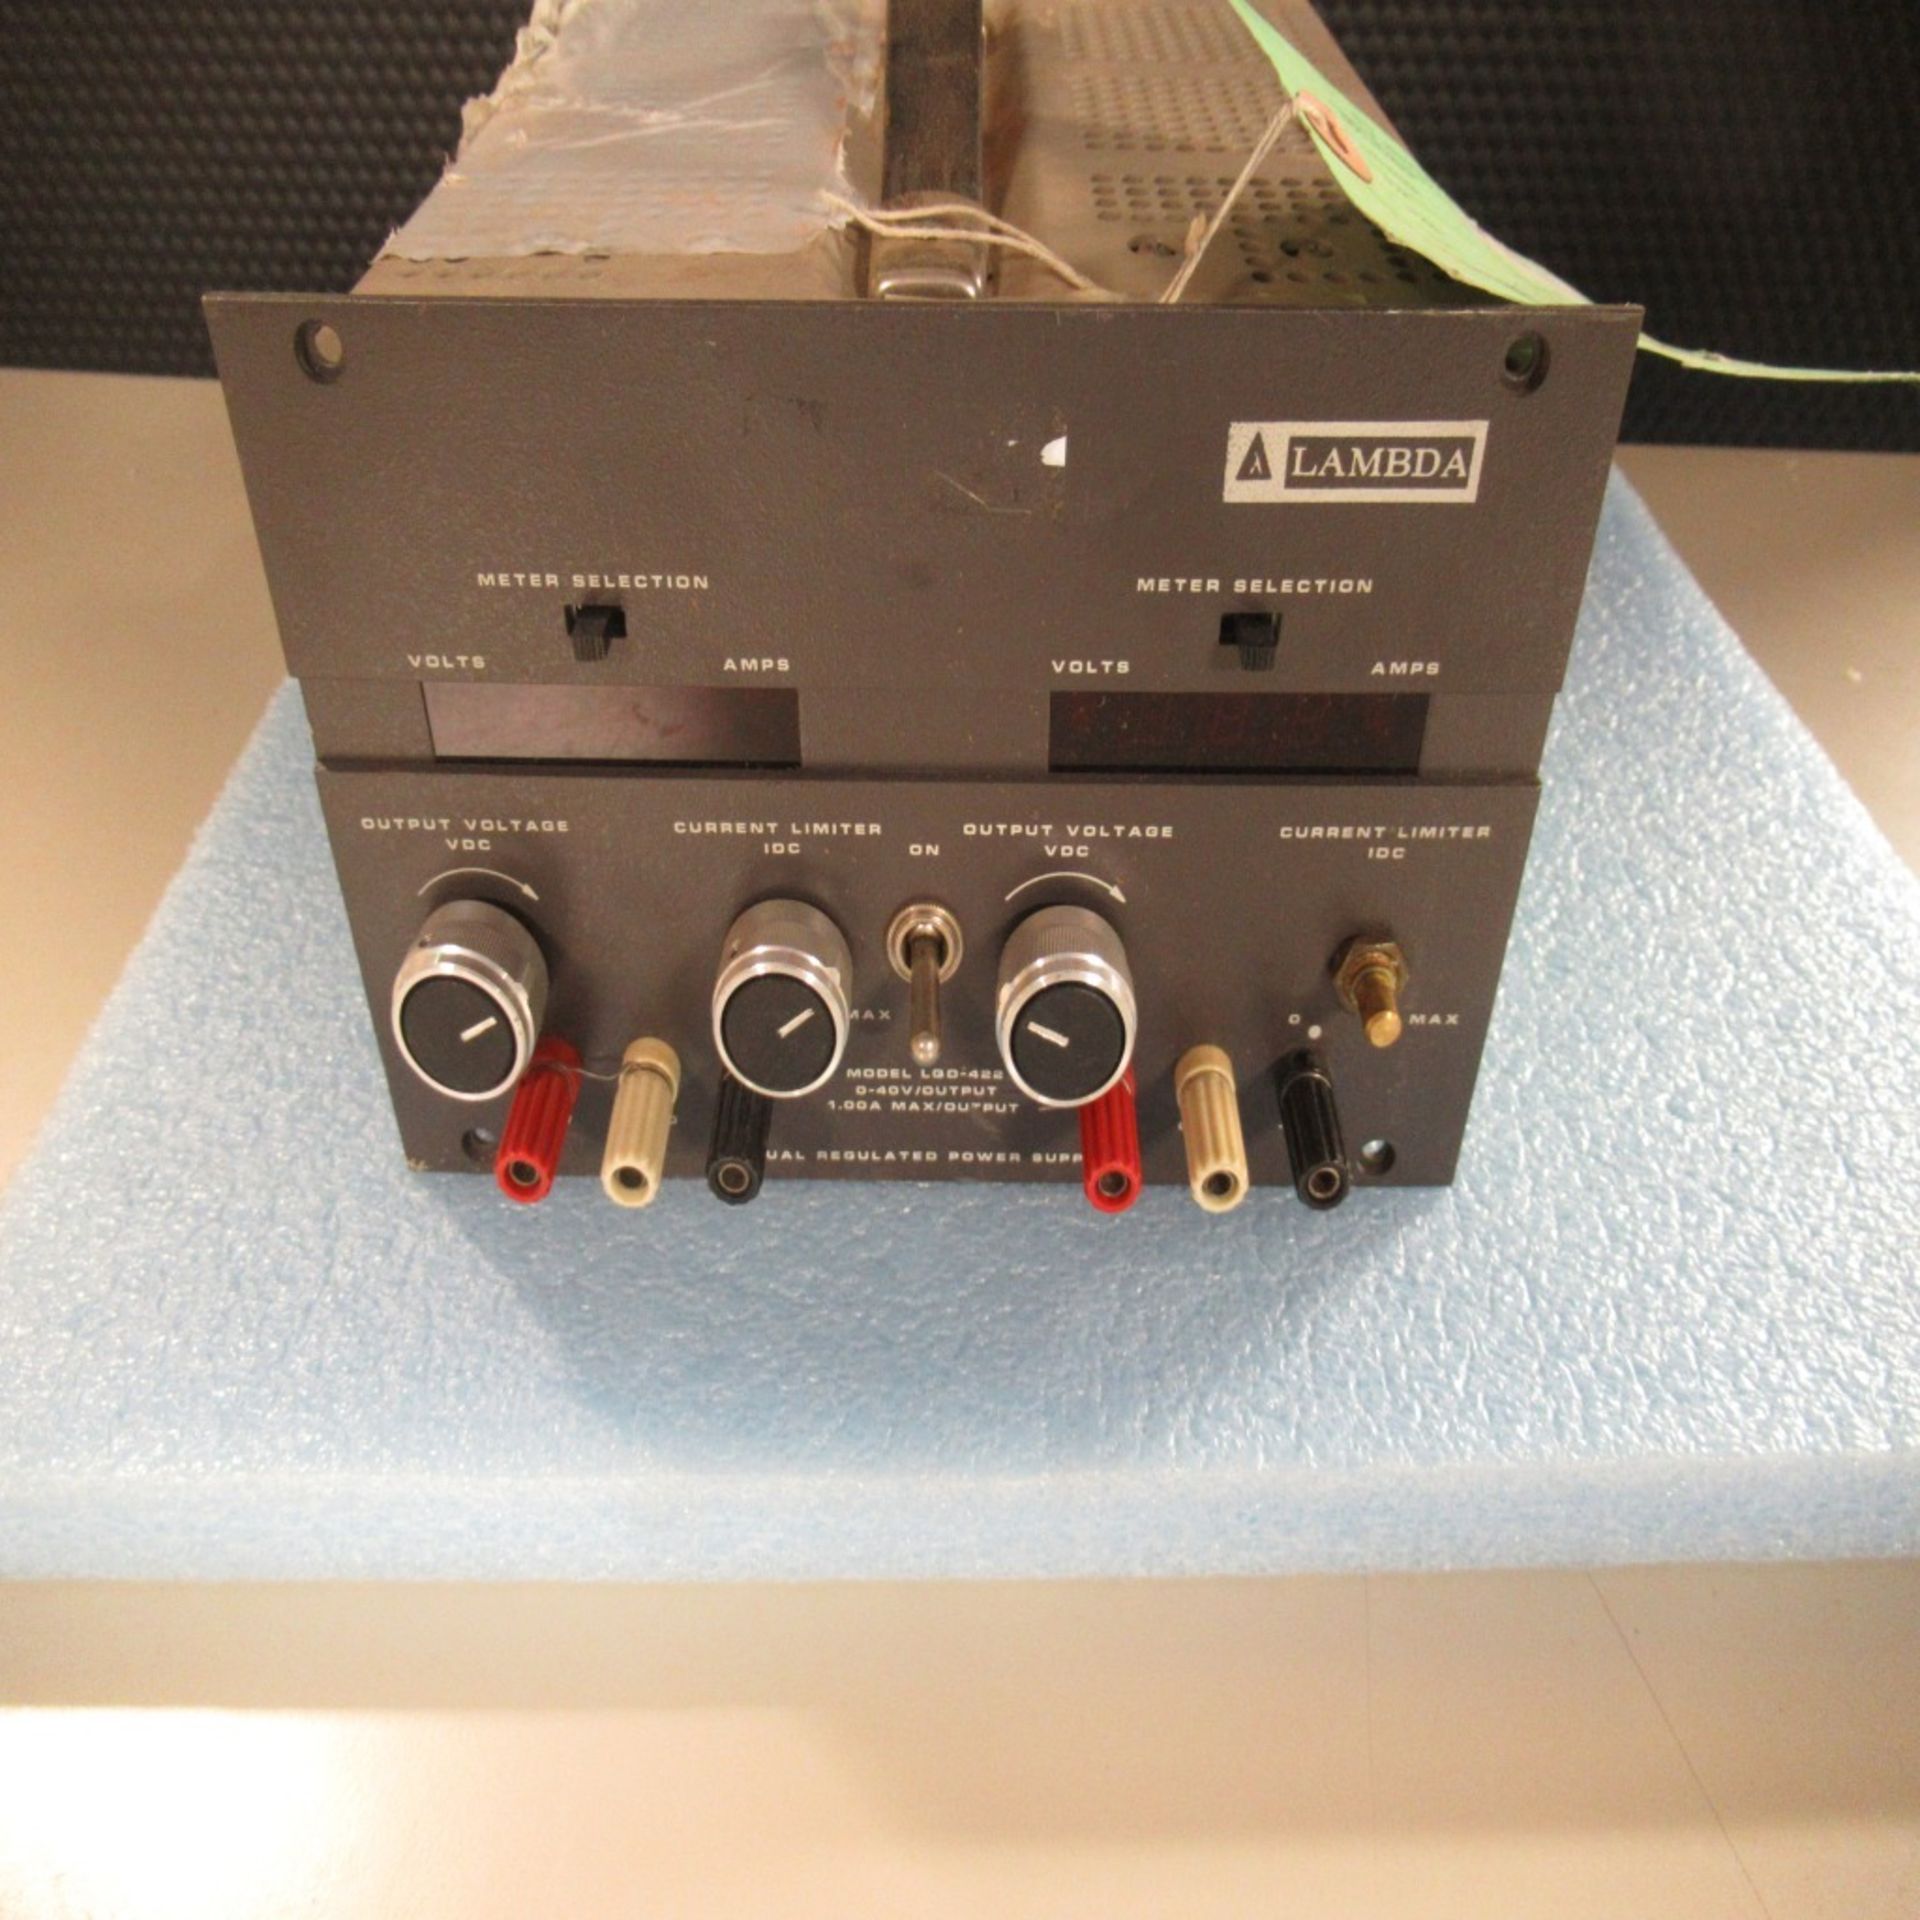 PHOTON SNAP SHOT MODEL 6000 *POWERS ON* NO SCREEN DISPLAY; FARNELL AP20-80 REGULATED POWER SUPPLY * - Image 101 of 222